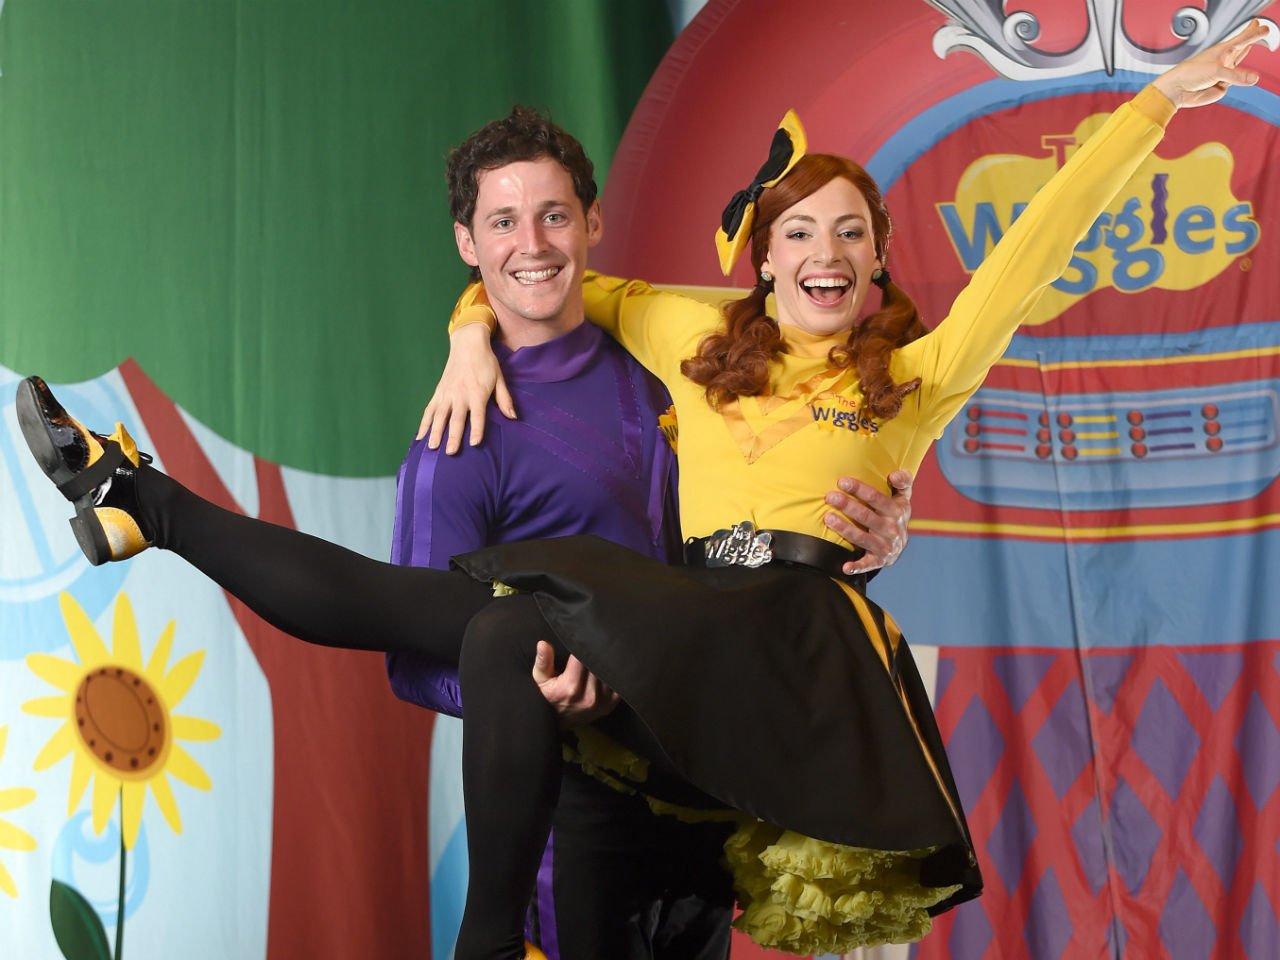 The Wiggles' Emma and Lachy are breaking up and parents around the wor...